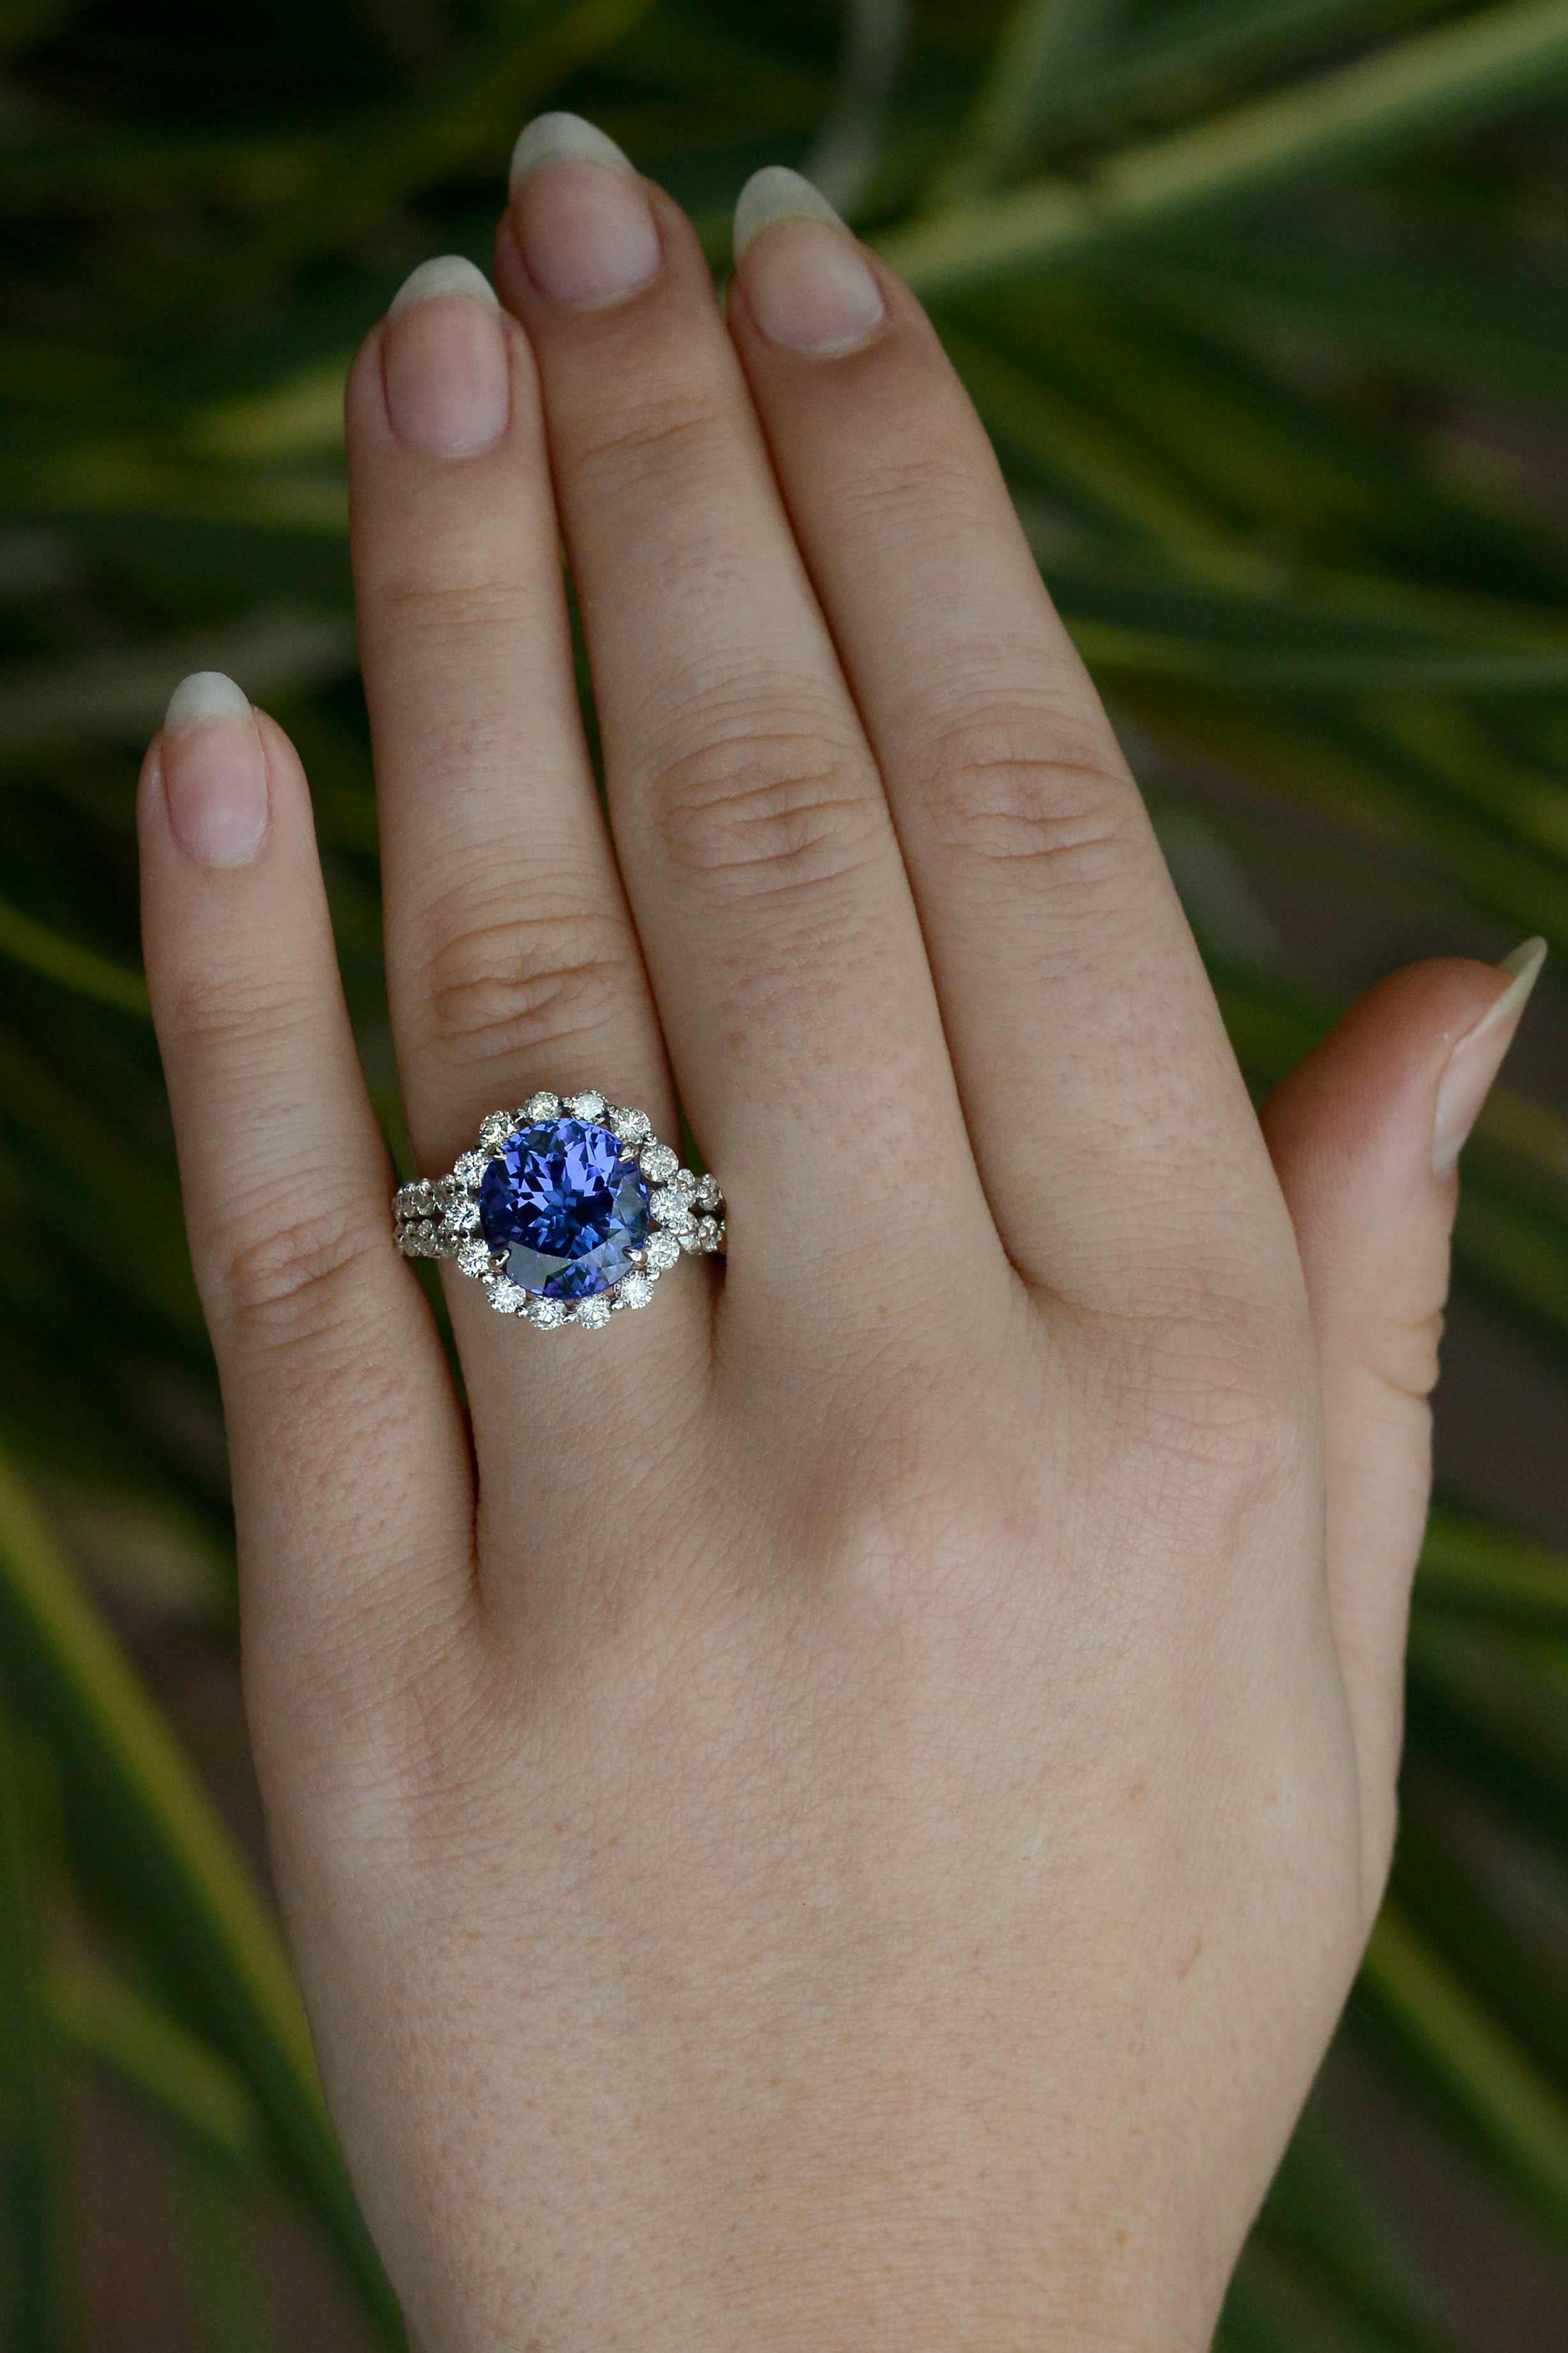 A rare round and substantial 6.15 carat tanzanite and diamond cocktail ring. The striking tanzanite flashes a deeply saturated, desirable blue tone with a scintillating velvety purple secondary color. This incredible gemstone is encircled with 1.50